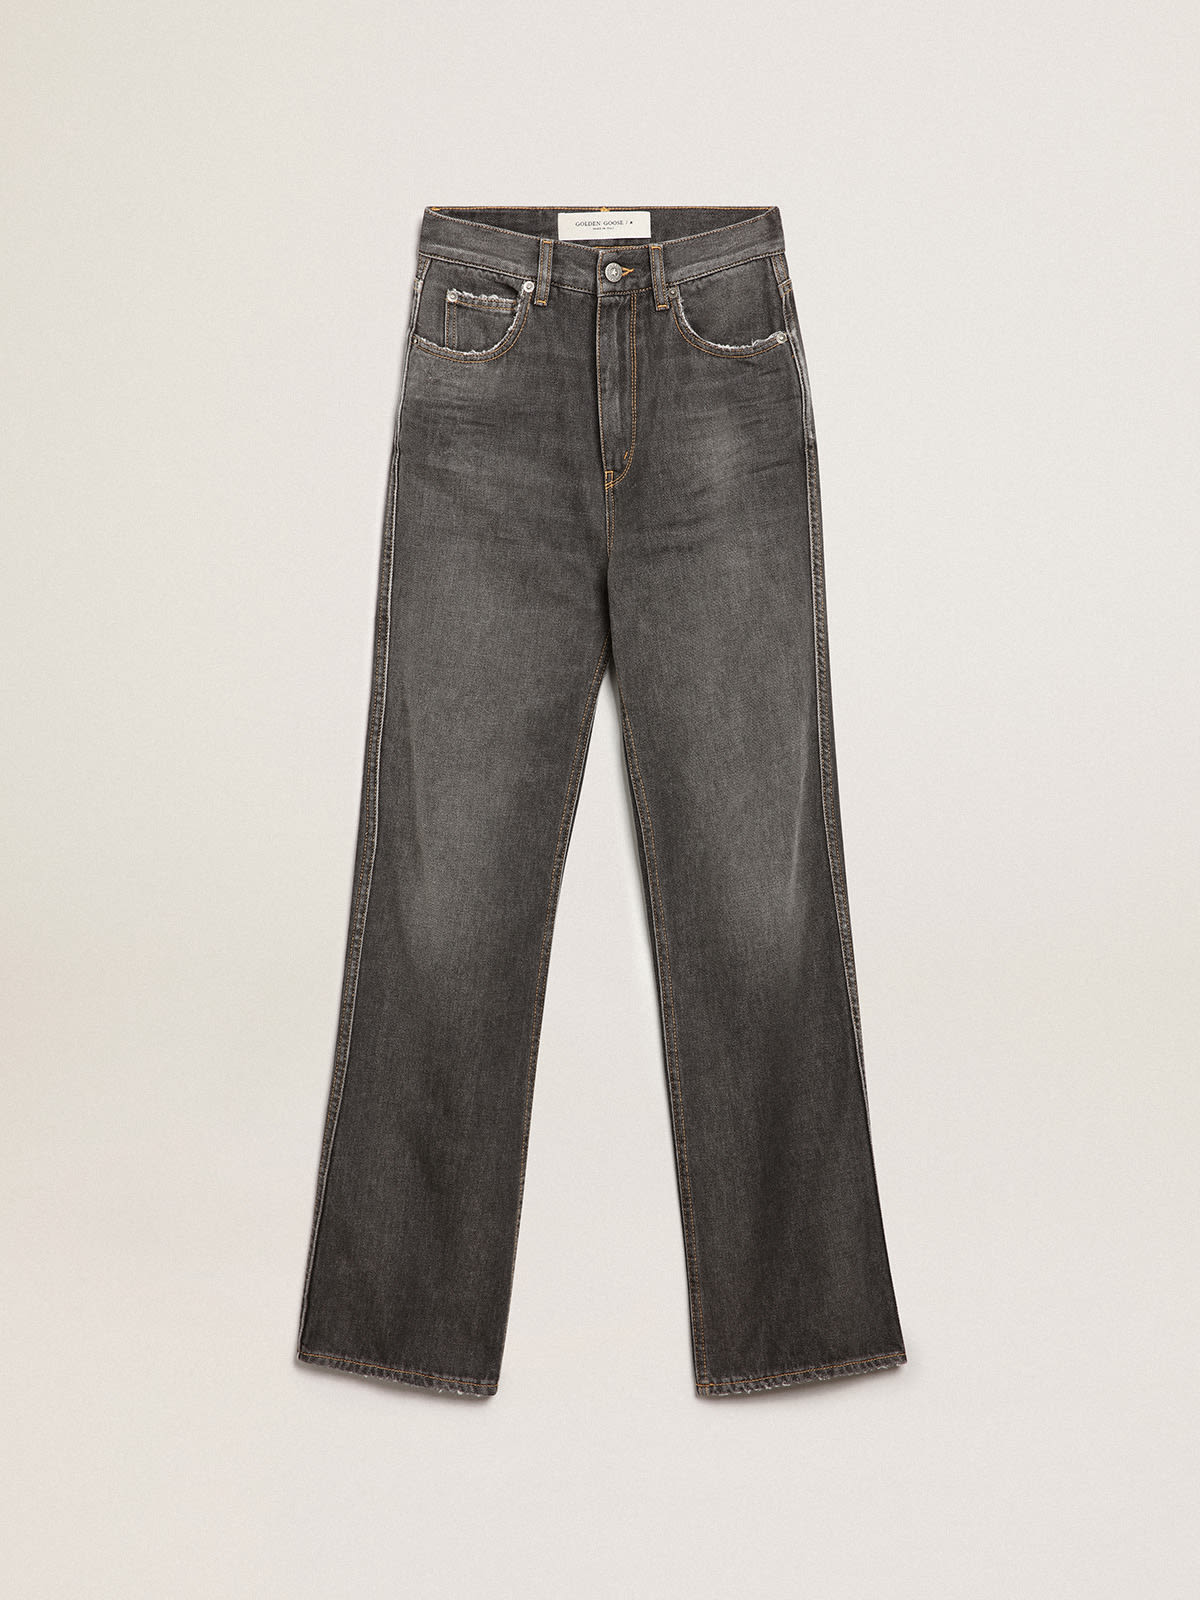 Golden Goose - Women's black jeans with stonewashed effect in 